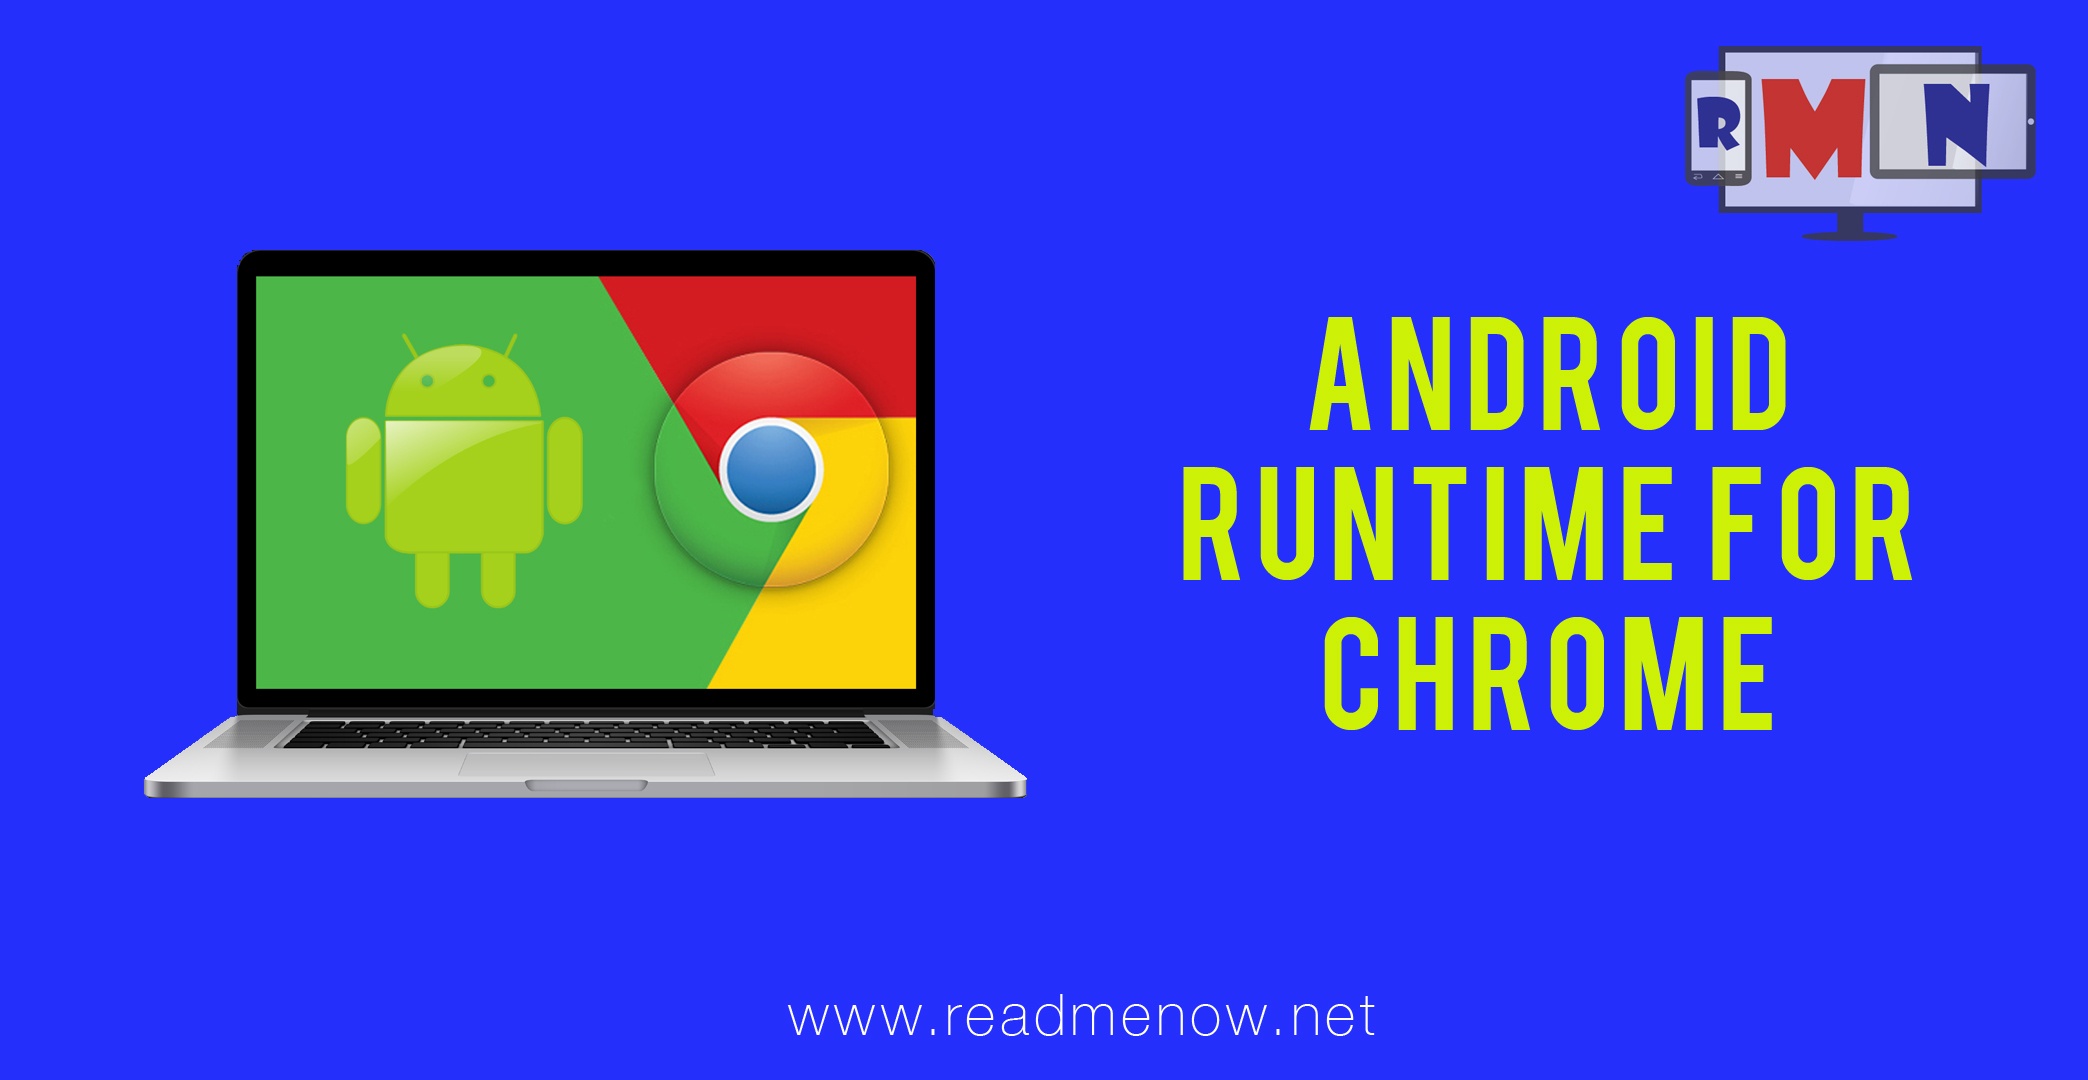 Android Runtime For Chrome.(Run Android Apps In Chrome)